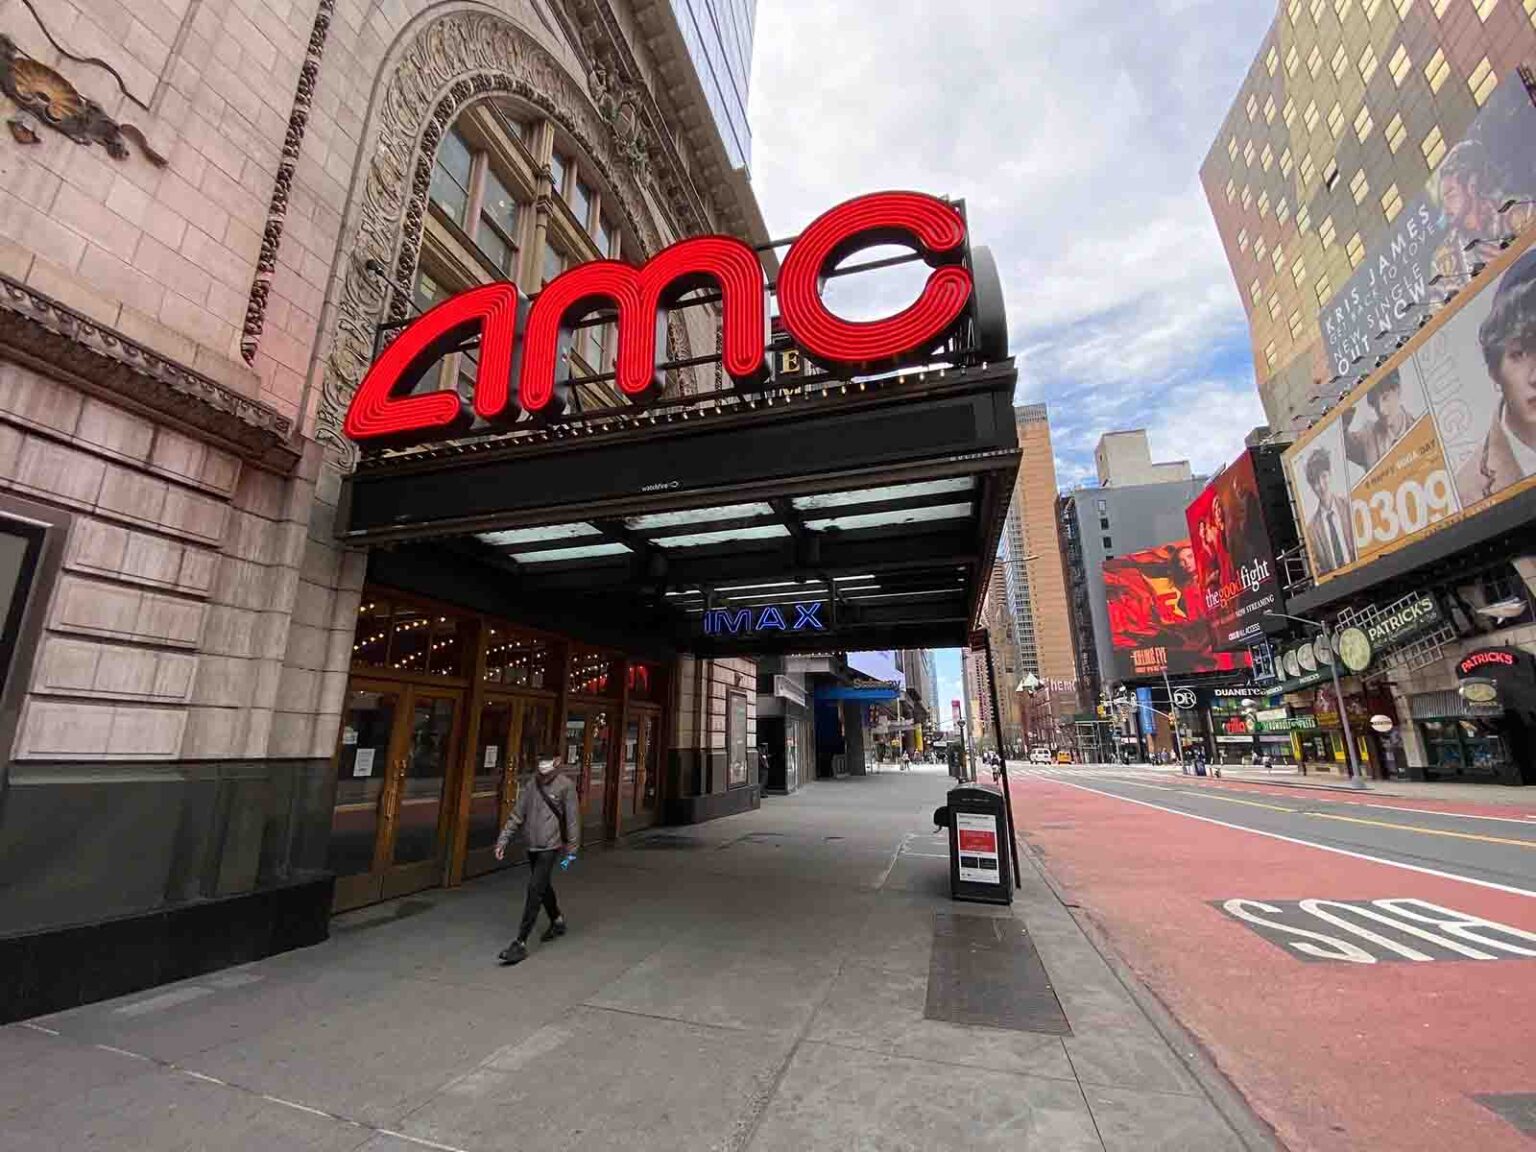 AMC theaters were in hot water thanks to the pandemic, but the hashtag #SaveAMC has made their stock price skyrocket. Here's how they did it.